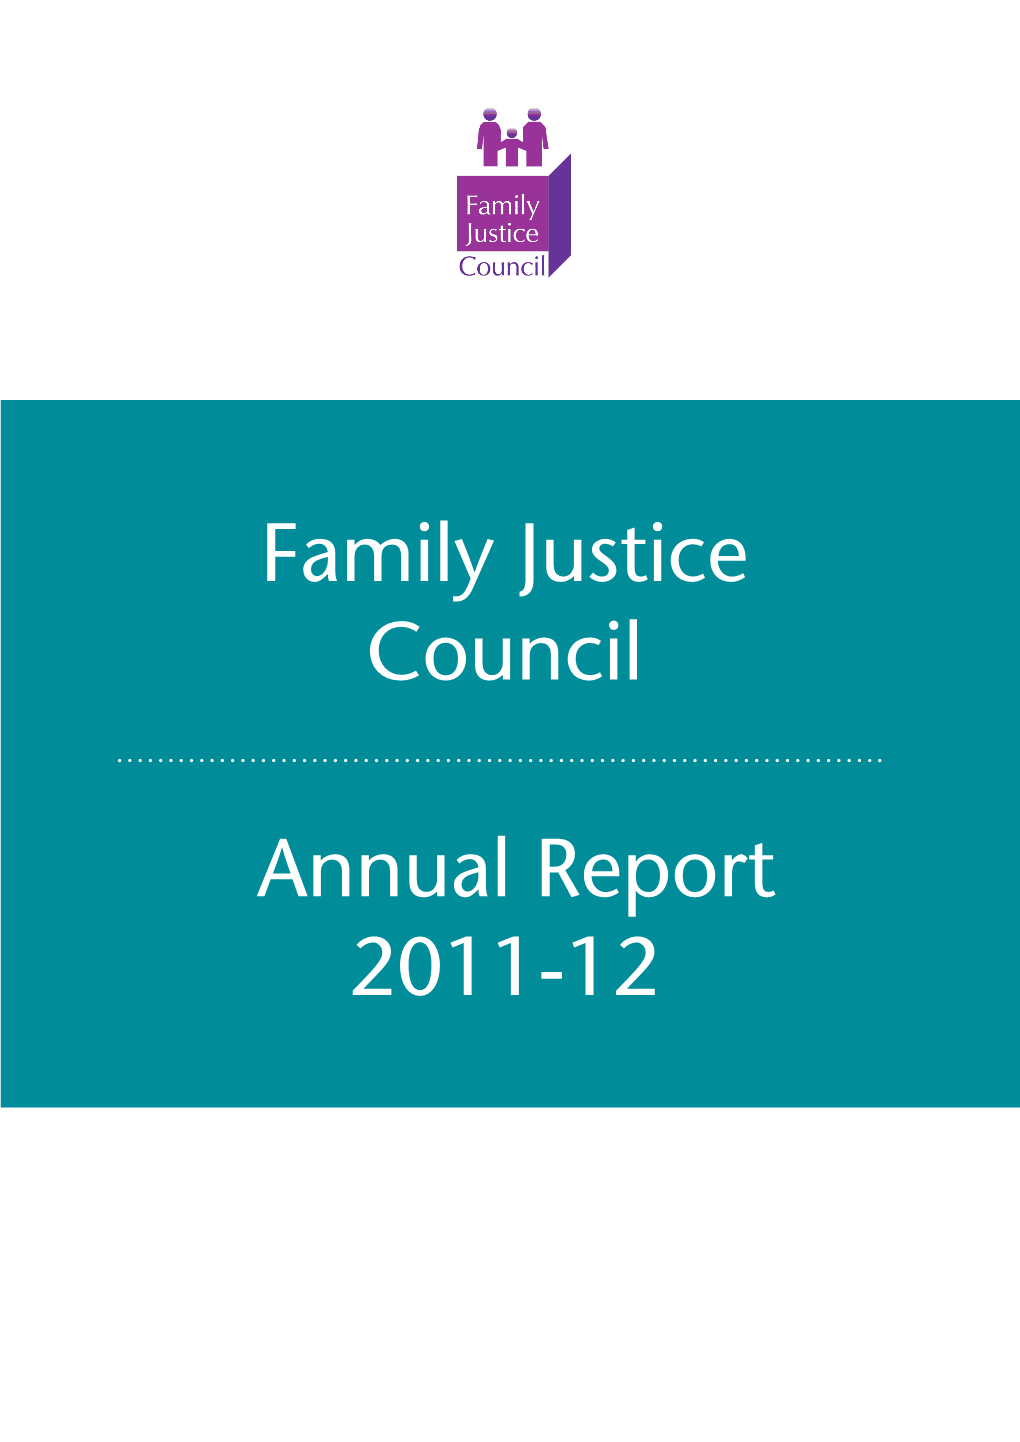 Family Justice Council Annual Report 2011-12 Contents